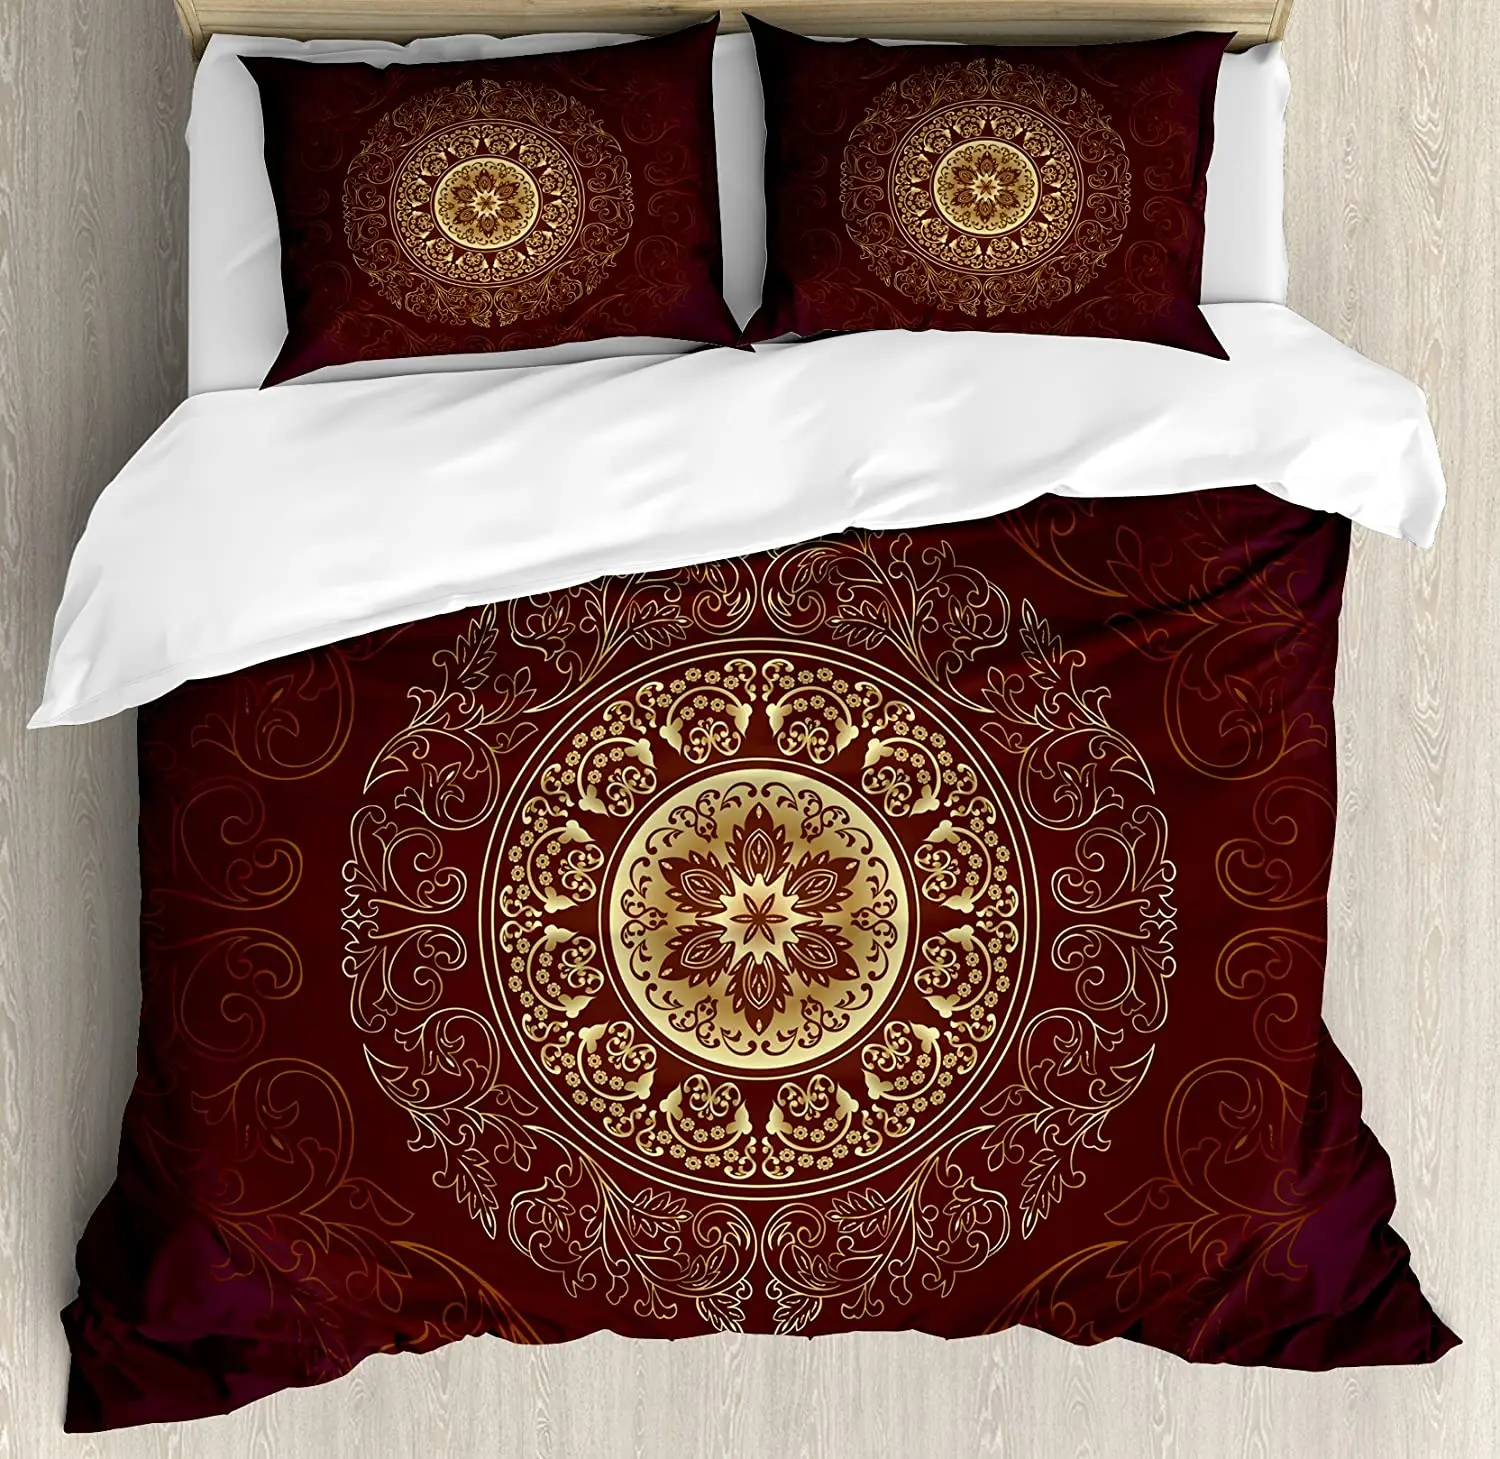 

Mandala Bedding Set For Bedroom Bed Home Ethnic Tribal Asian Culture Vintage Floral Duvet Cover Quilt Cover And Pillowcase